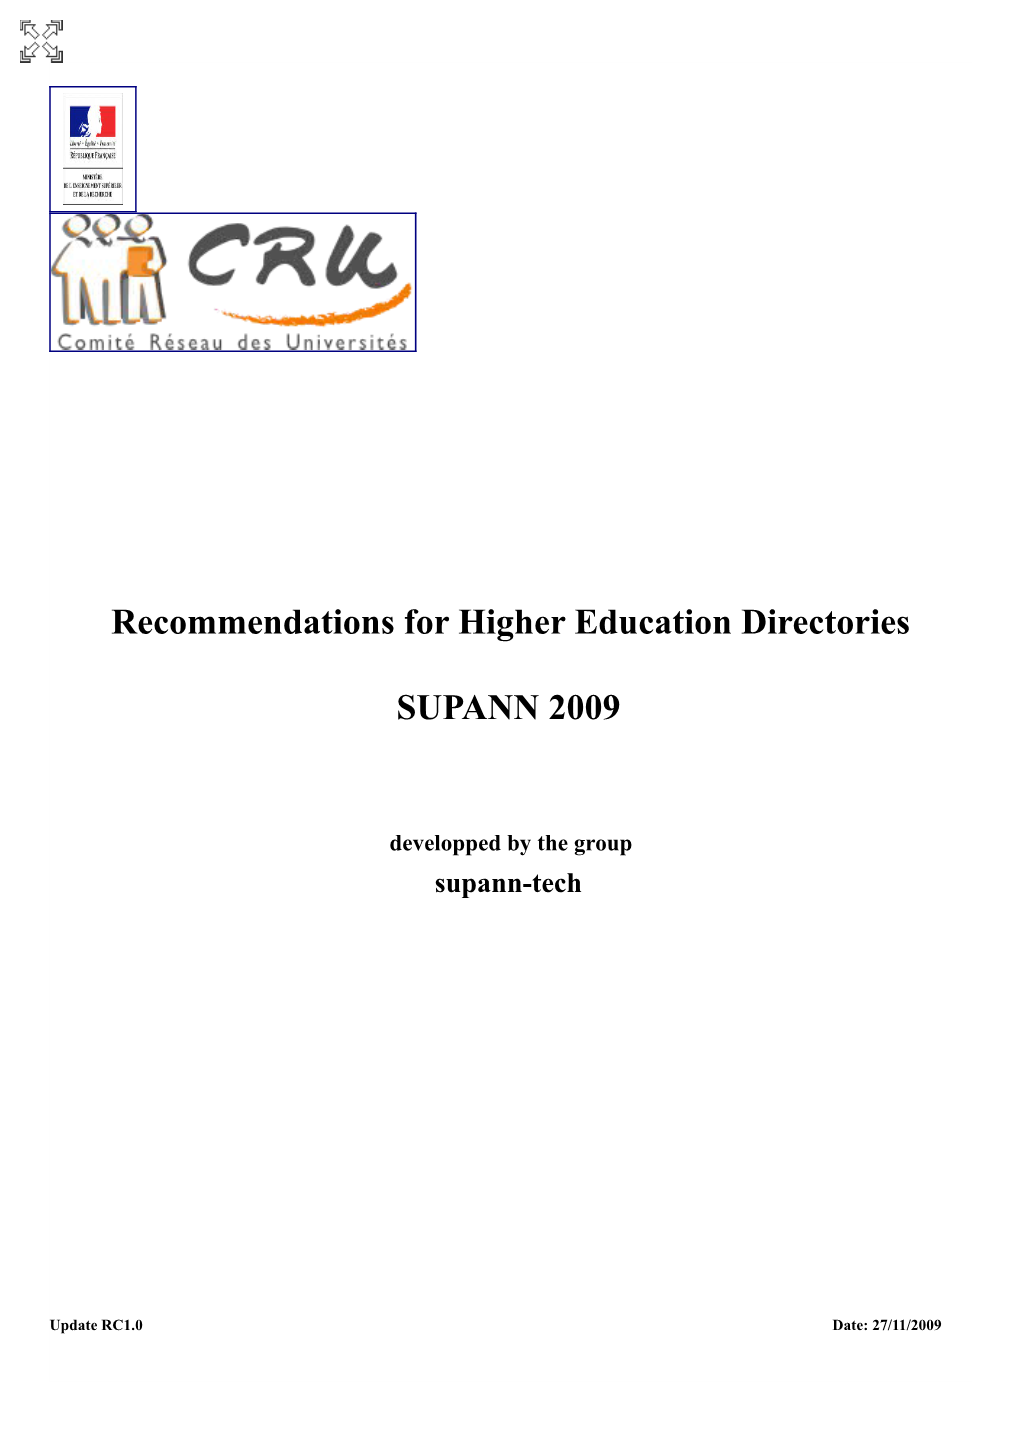 Recommendations for Higher Education Directories